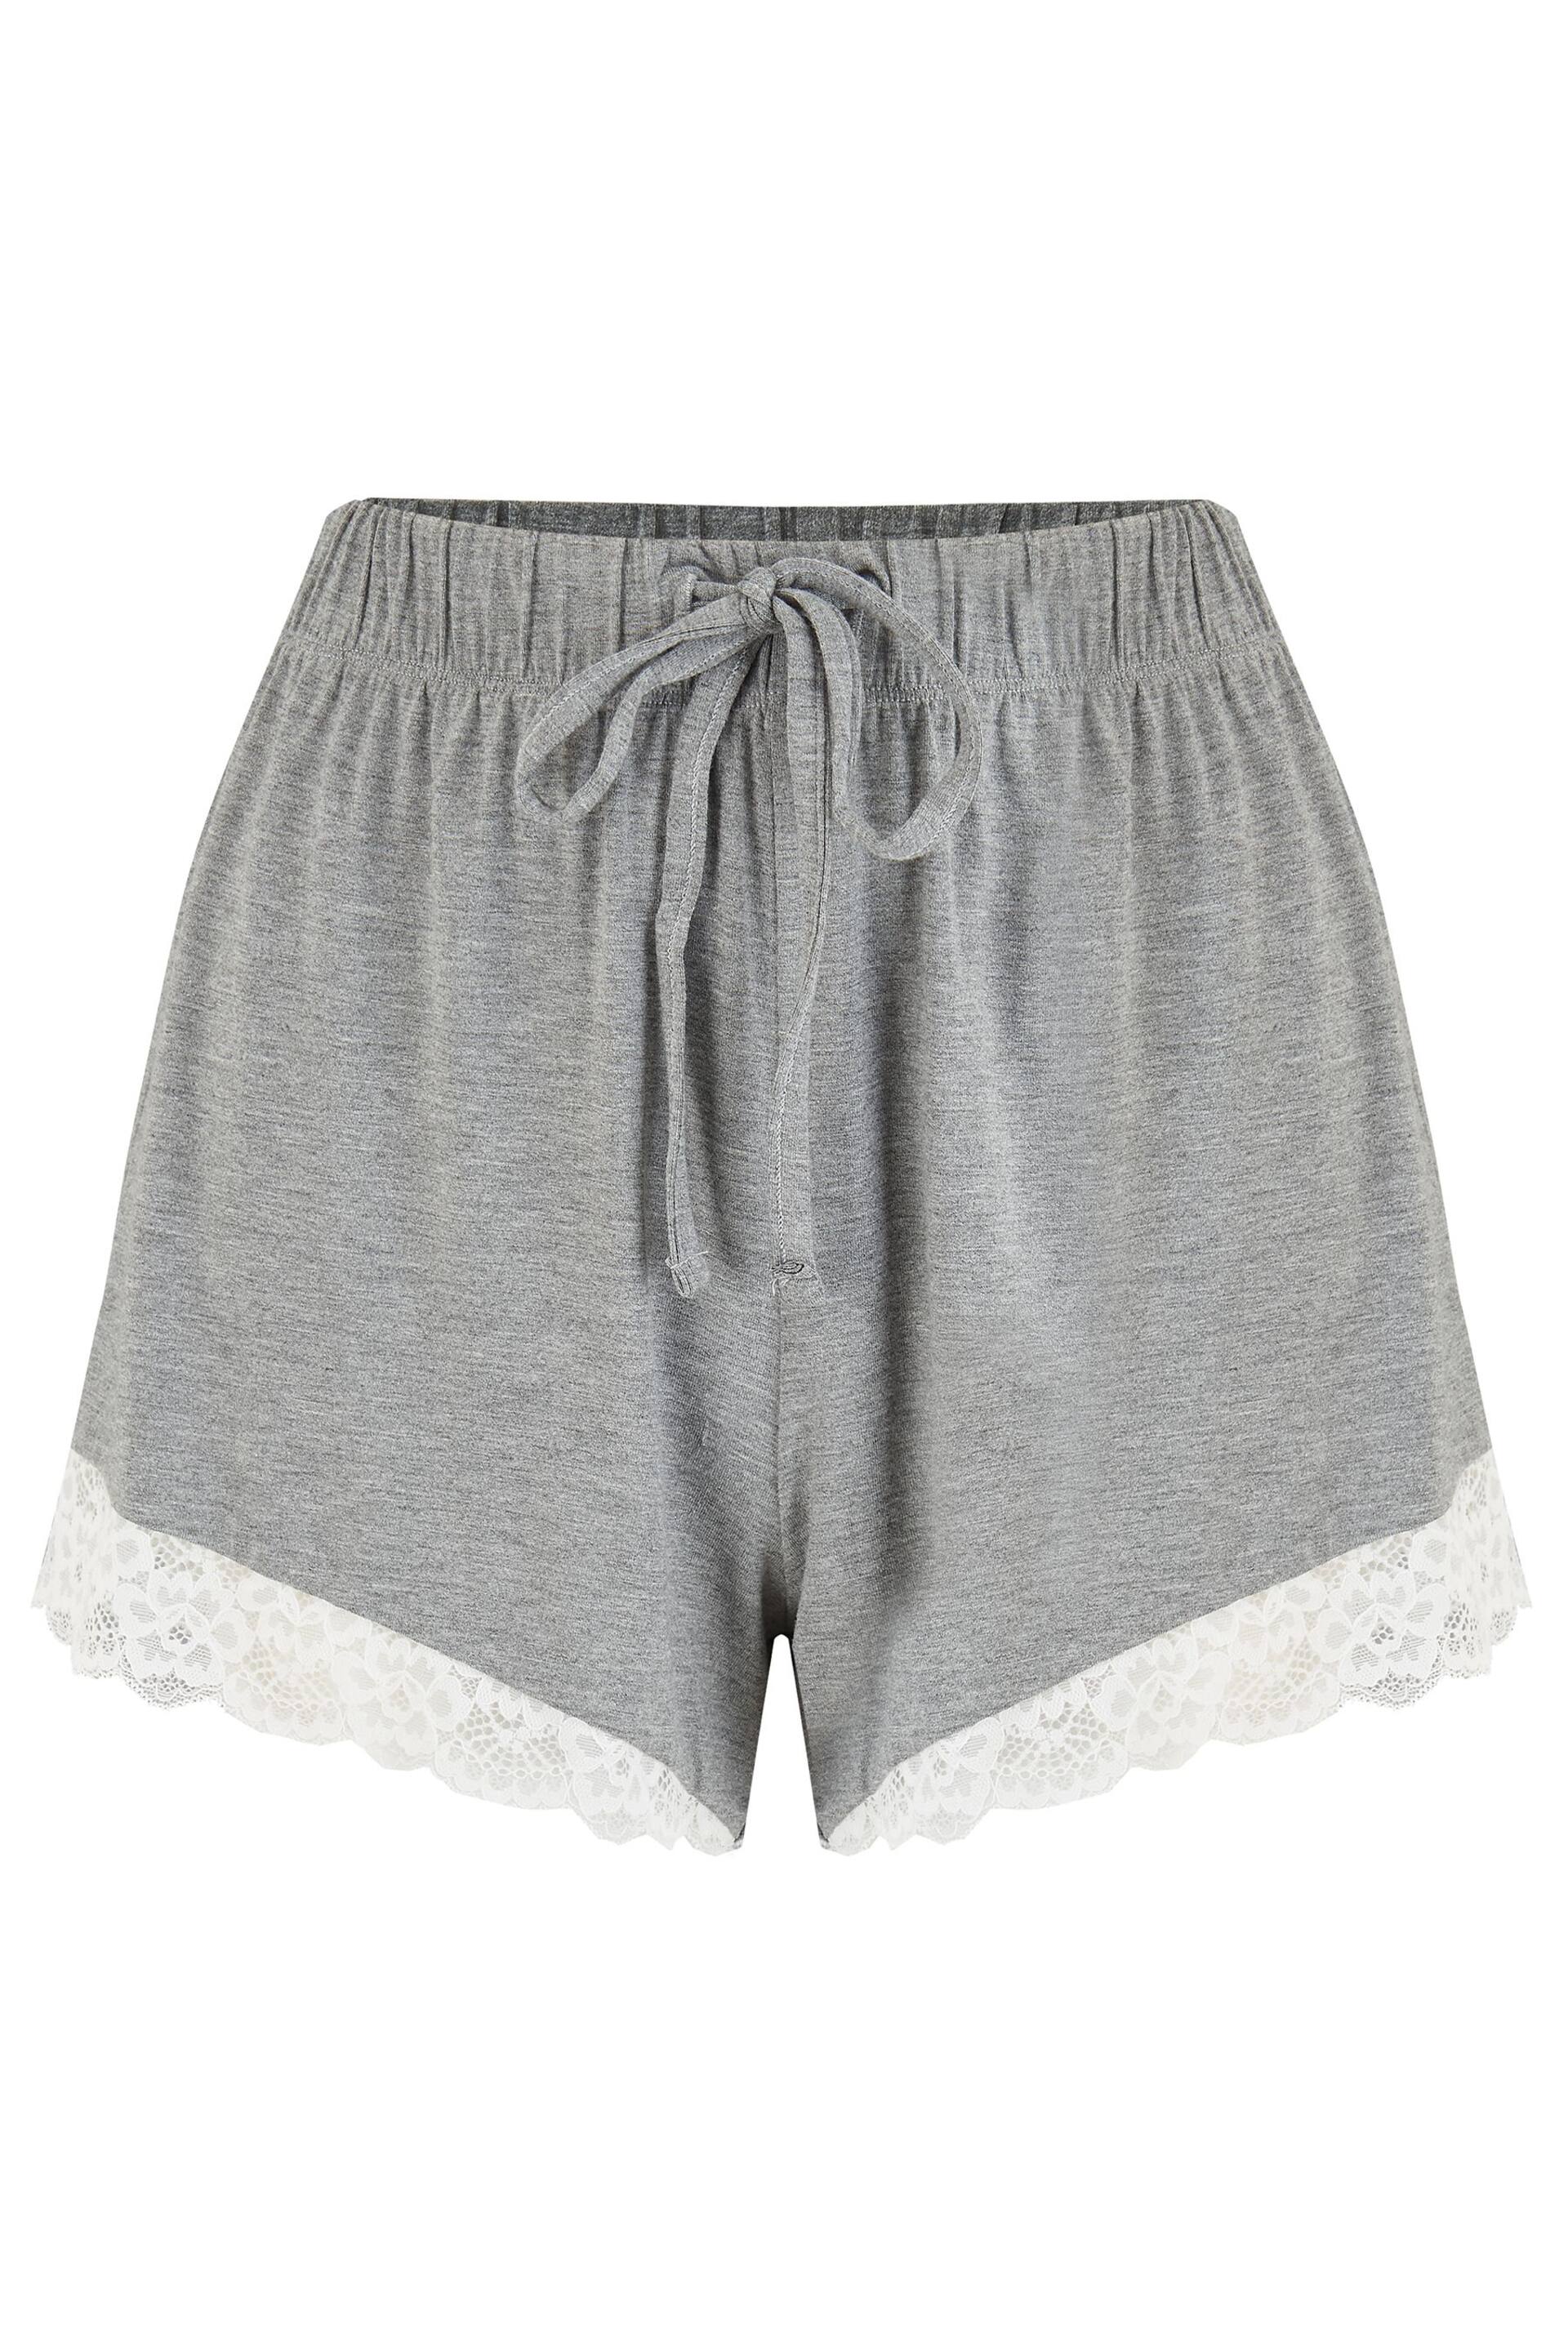 Pour Moi Light Grey Sofa Loves Lace Soft Jersey Shorts - Image 4 of 5